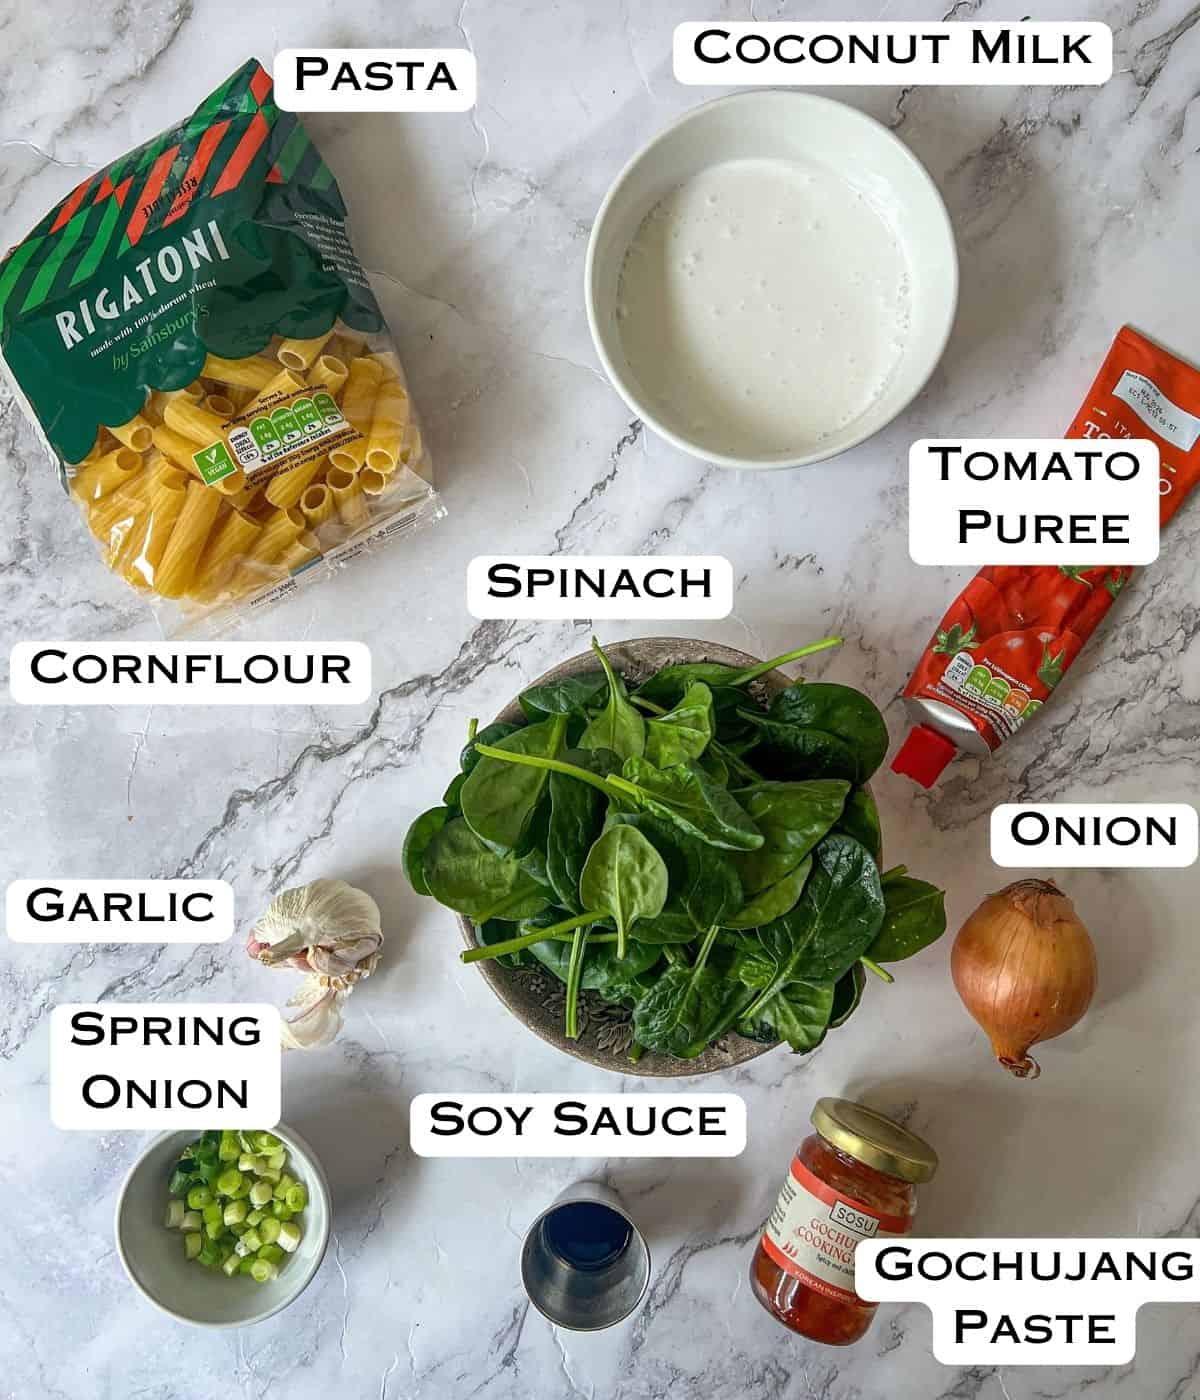 Ingredients laid out for gochujang pasta.